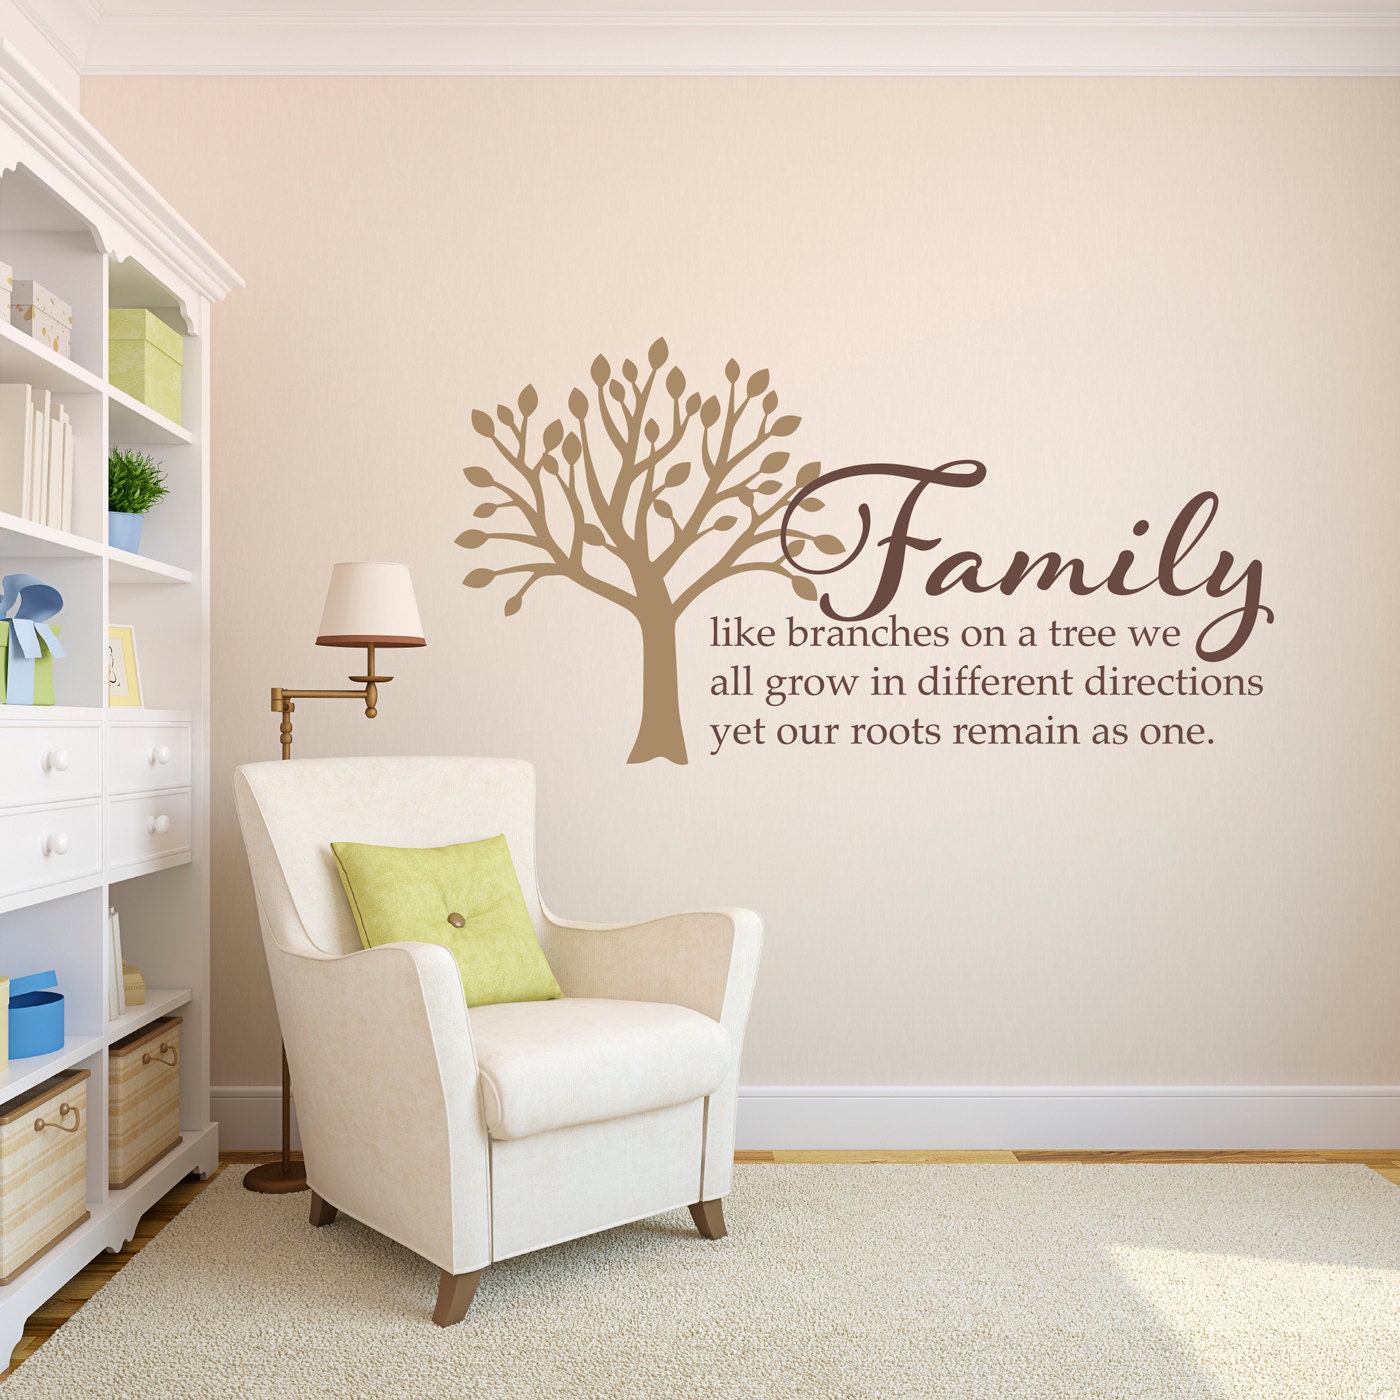 Family Wall Decal - Family like branches on a Tree Decal - Large 2 color design